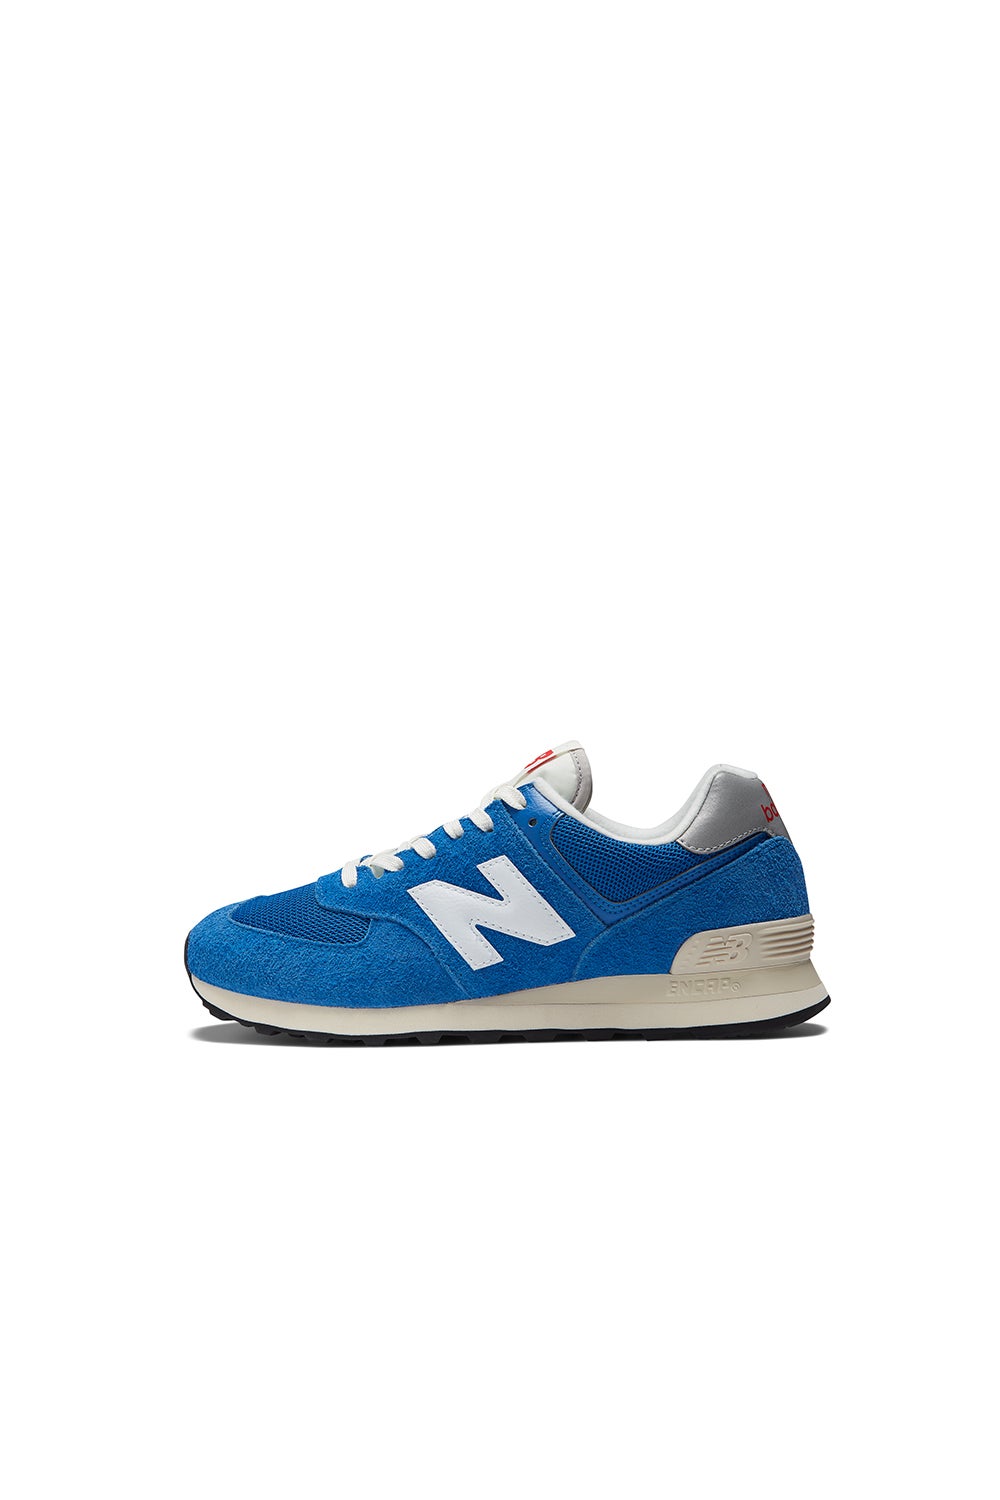 New Balance 574 American Blue with White